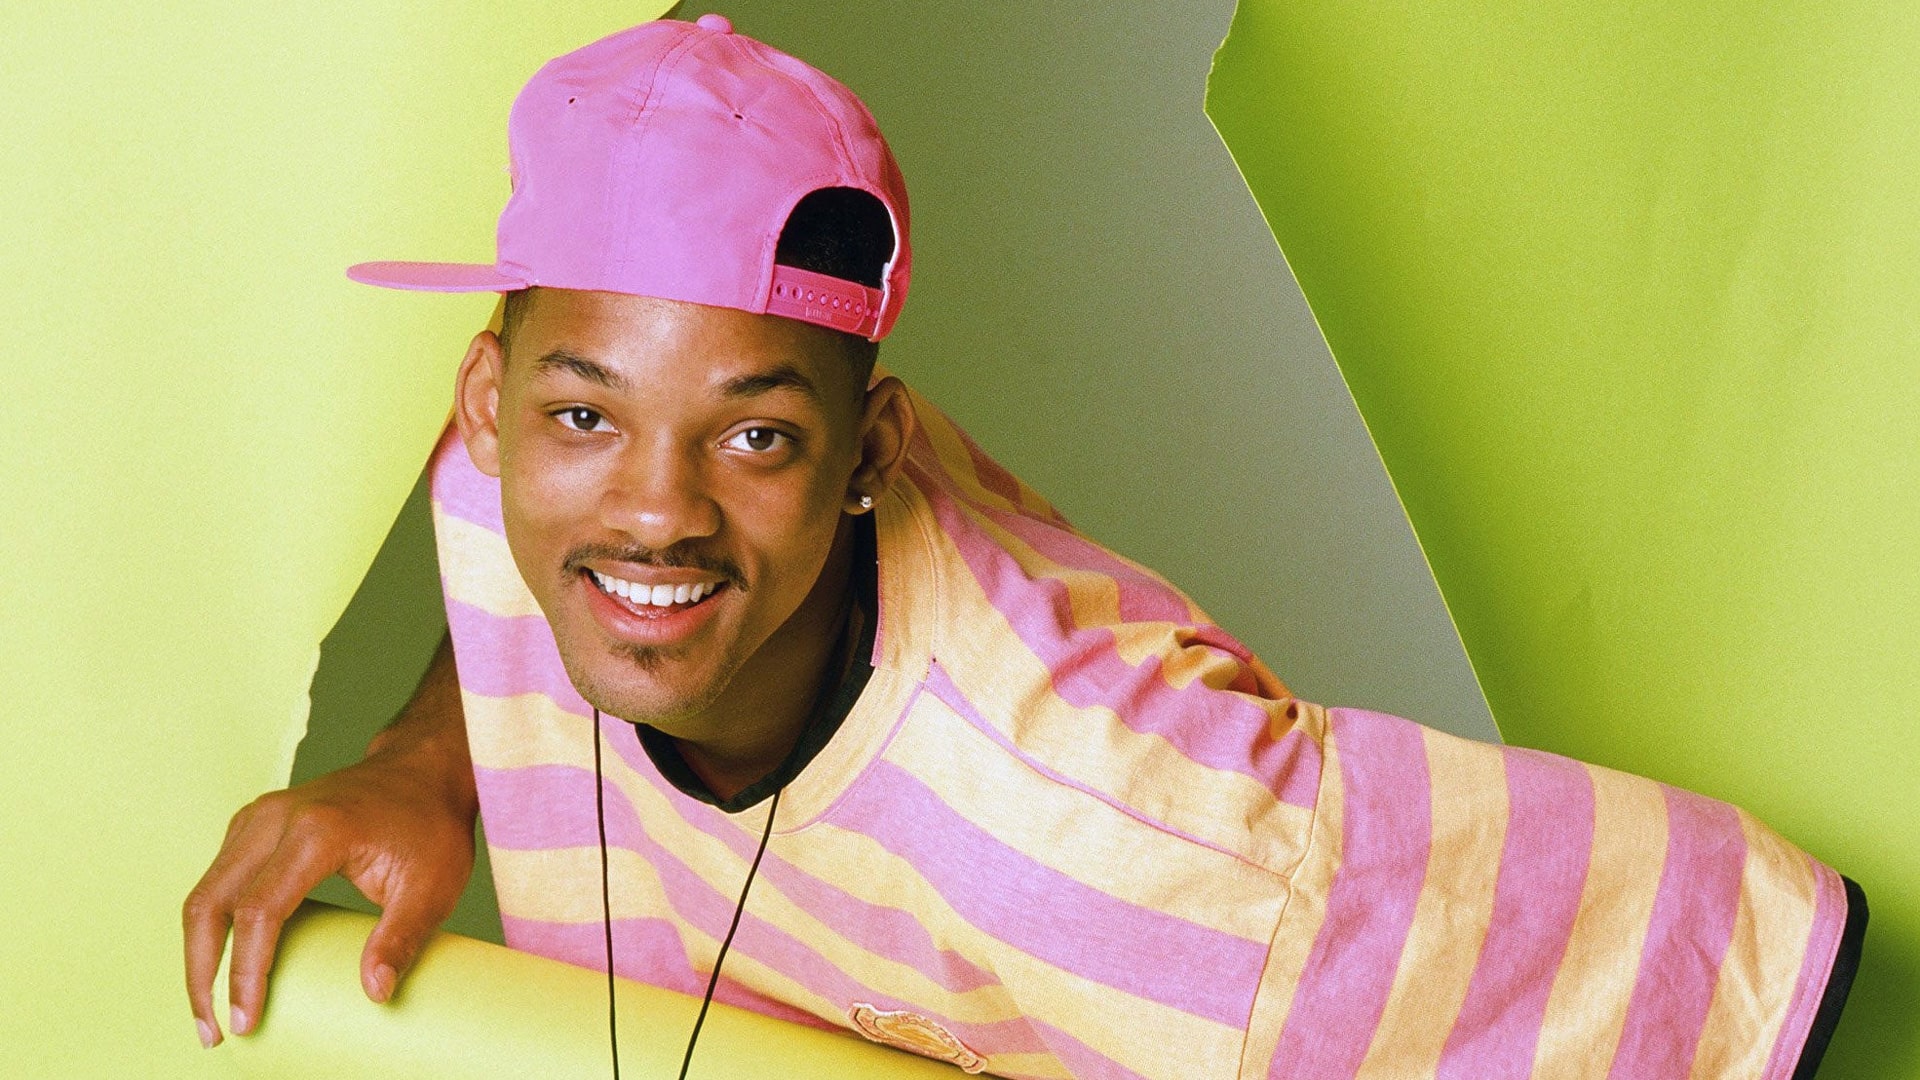 Fresh Prince Of Bel-Air Facts - 27 The Fresh Prince Of Bel-Air Facts You Haven't Read Before